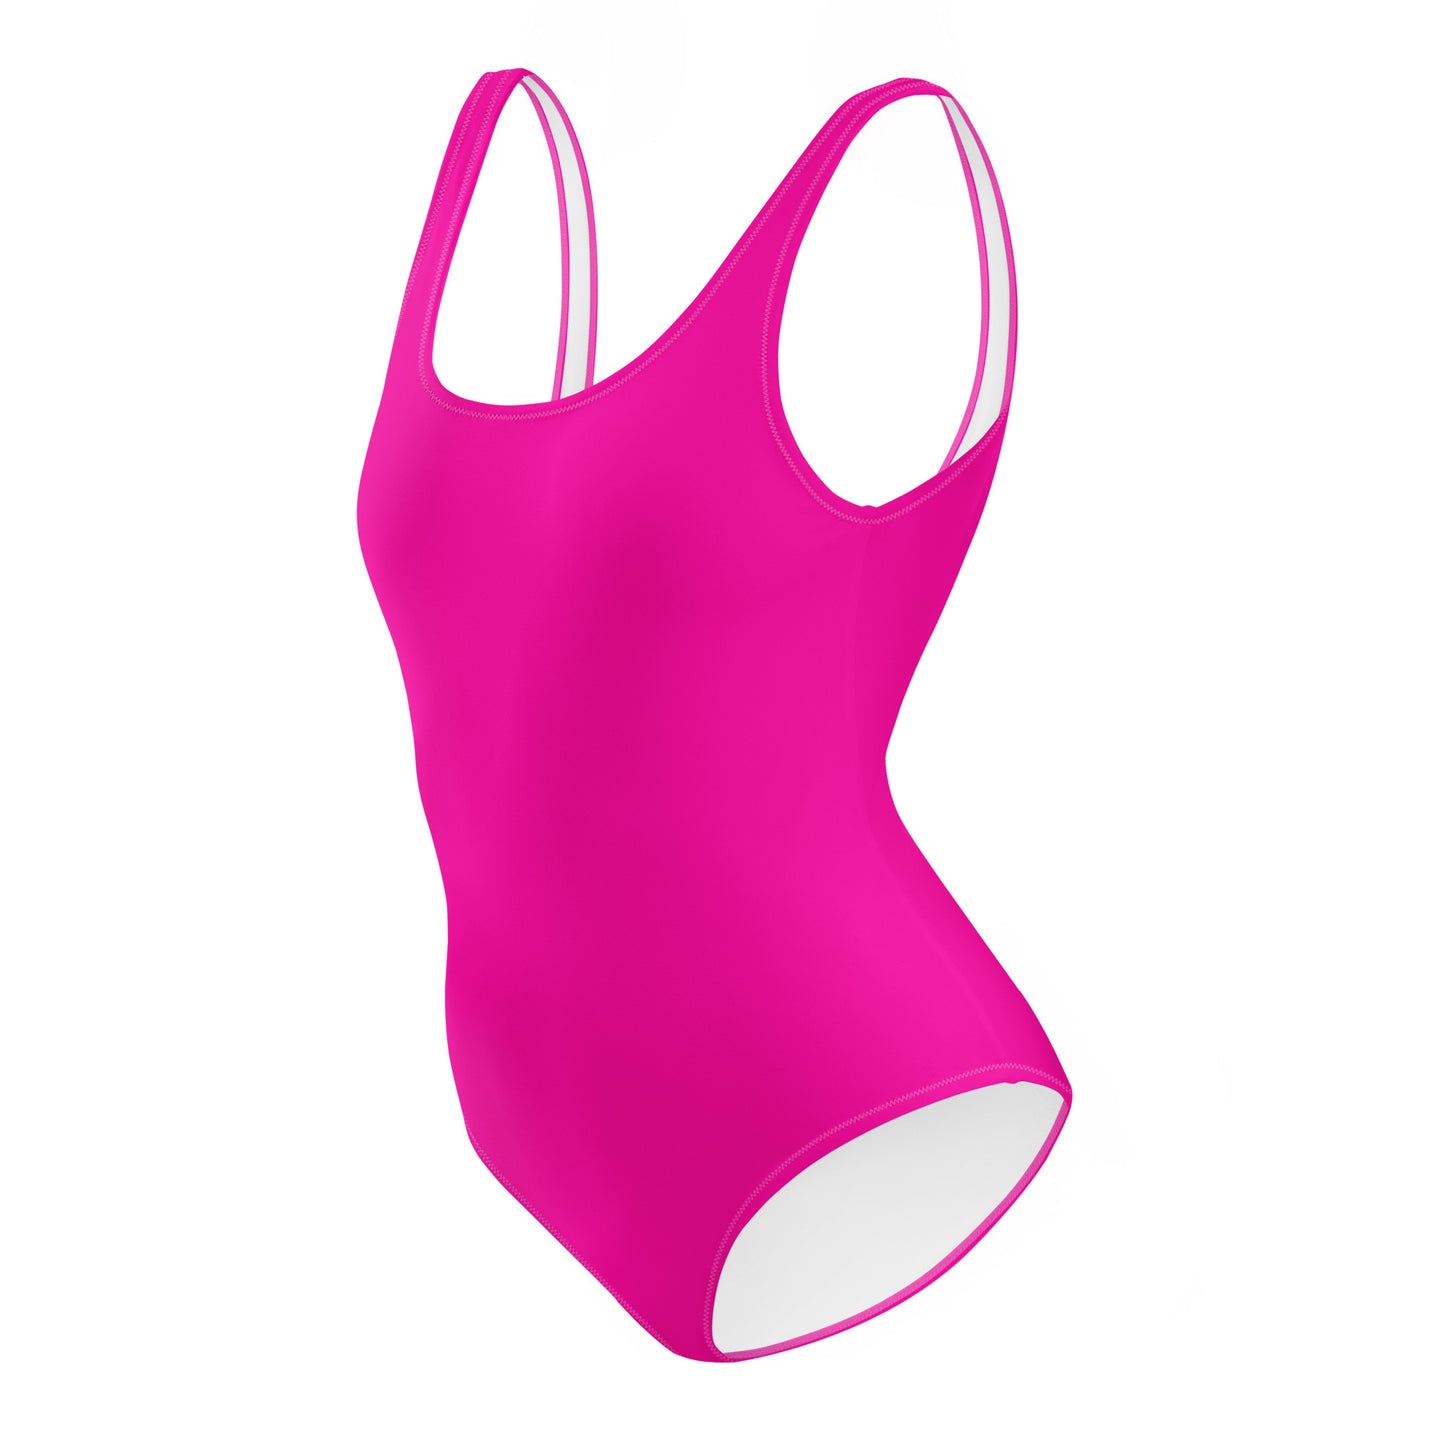 Hot Pink One-Piece Swimsuit